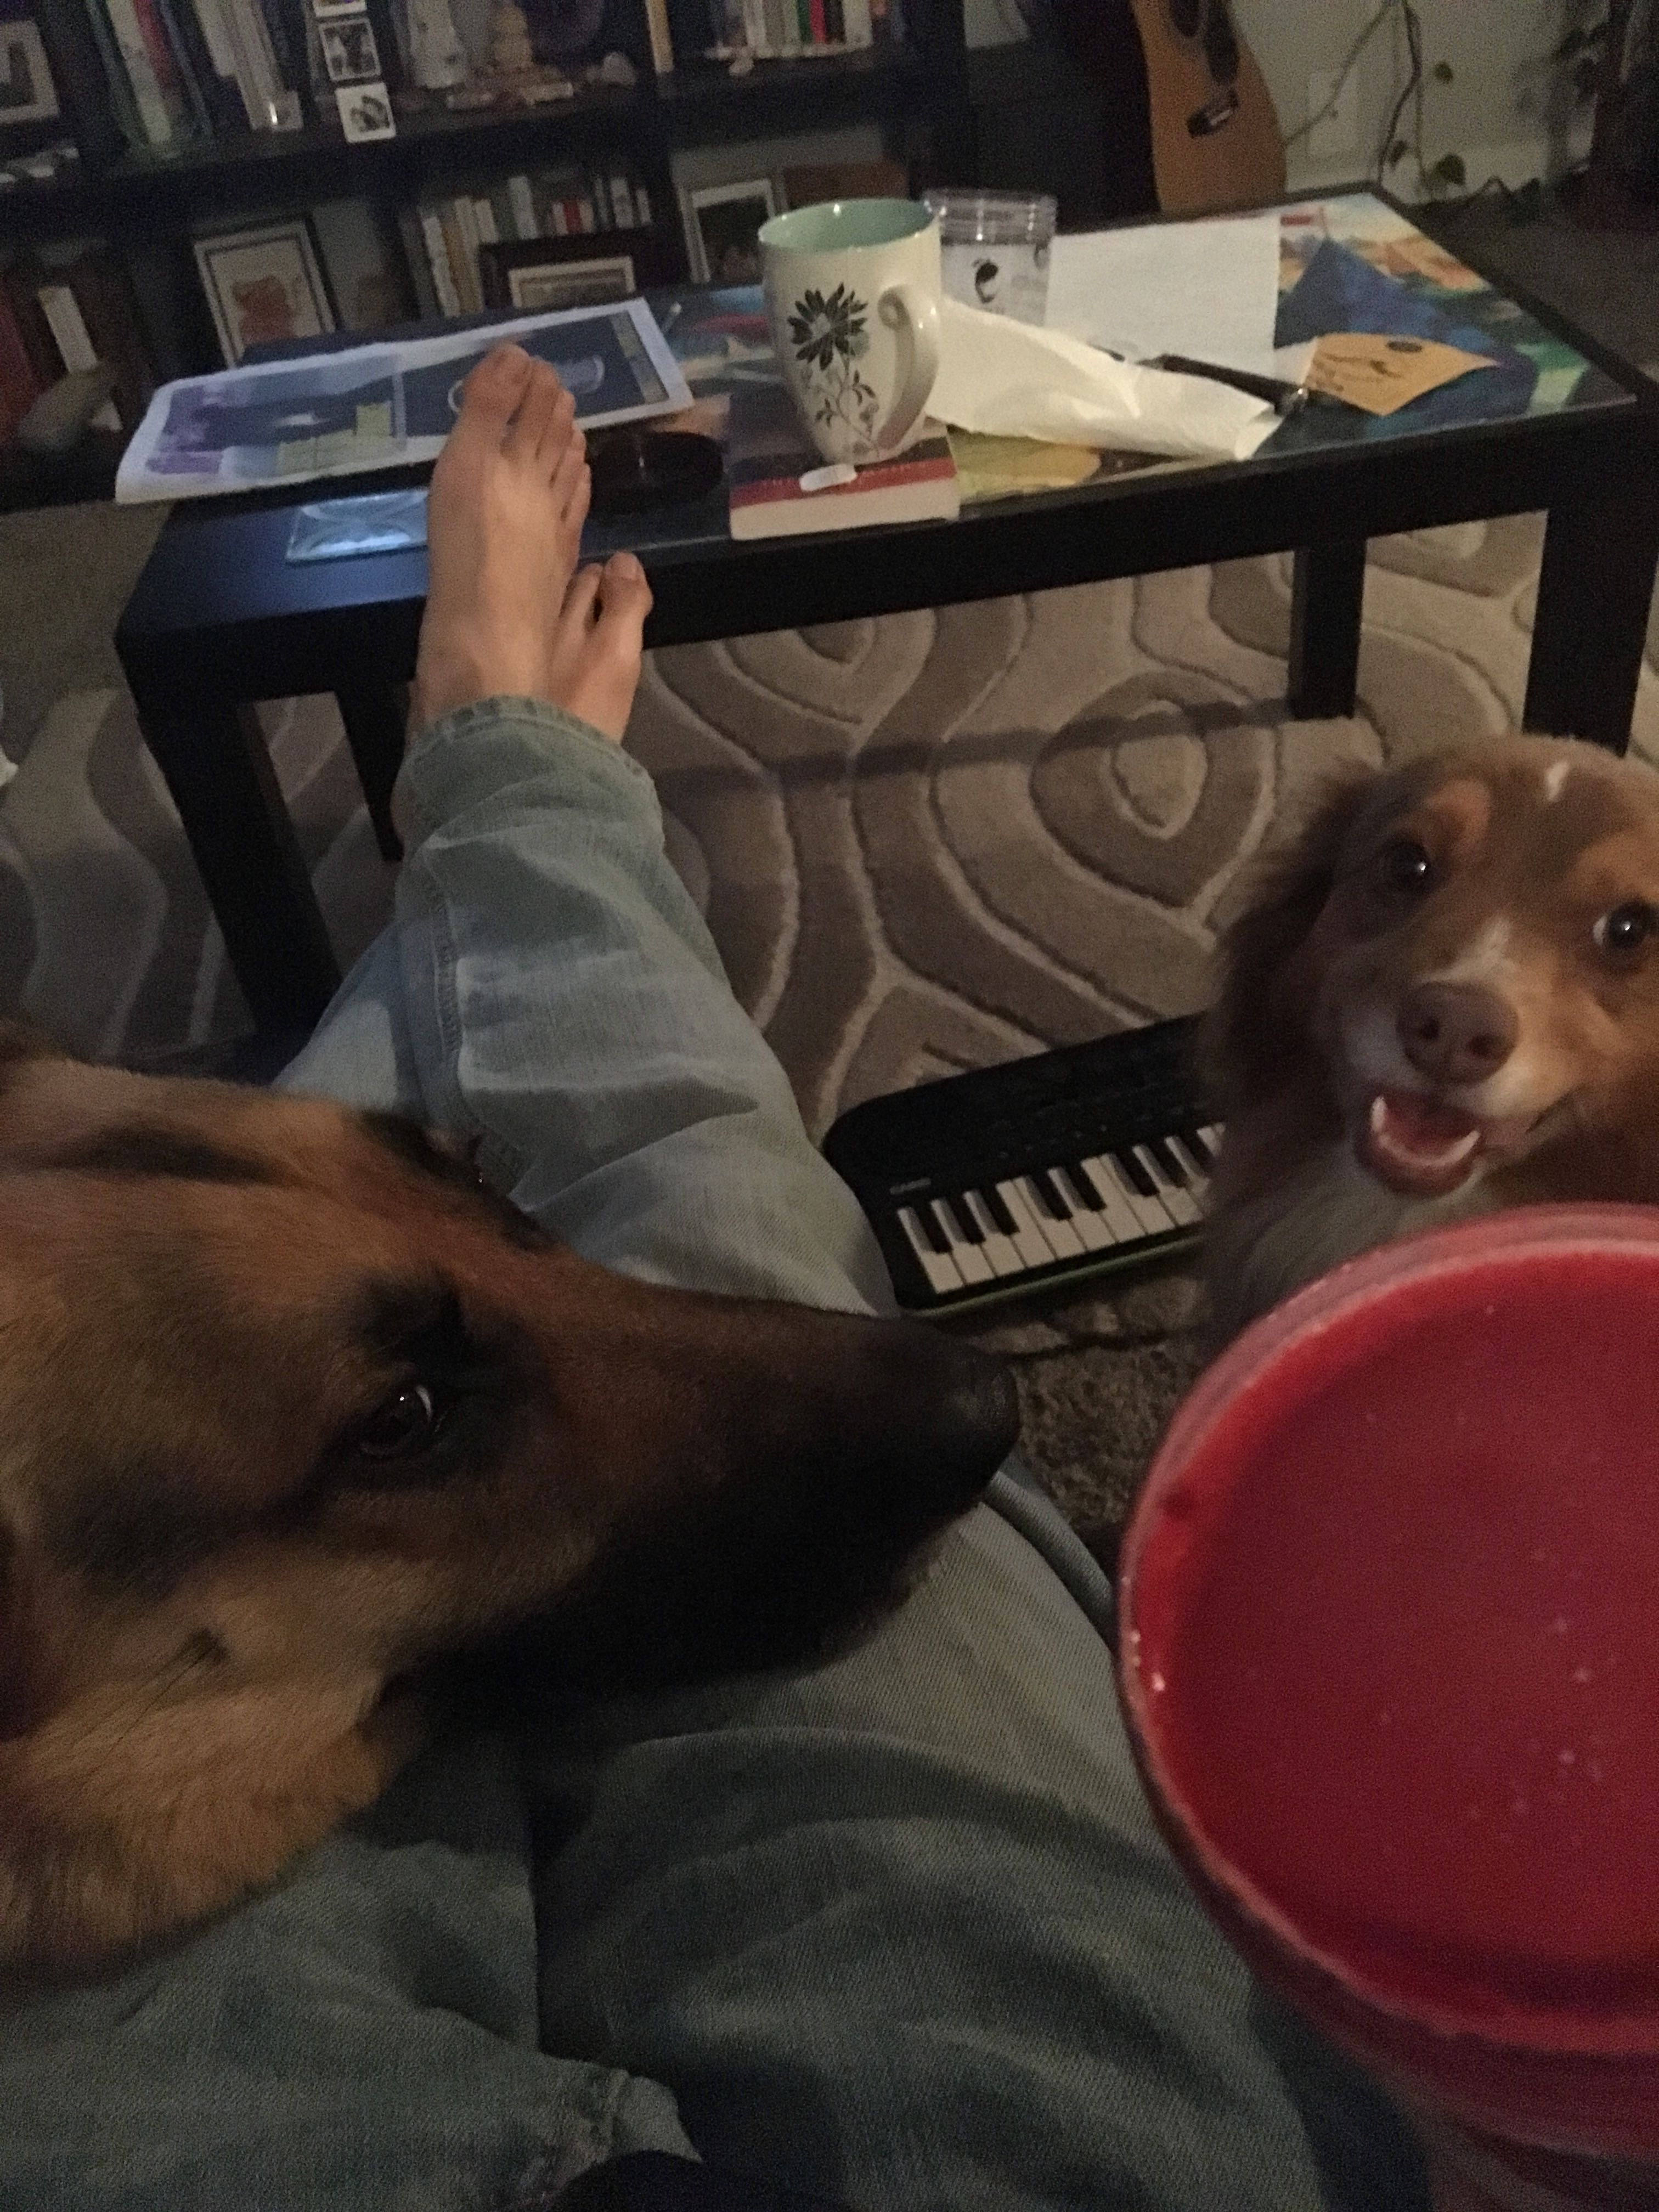 The night before: eating sorbet ice cream with the dogs